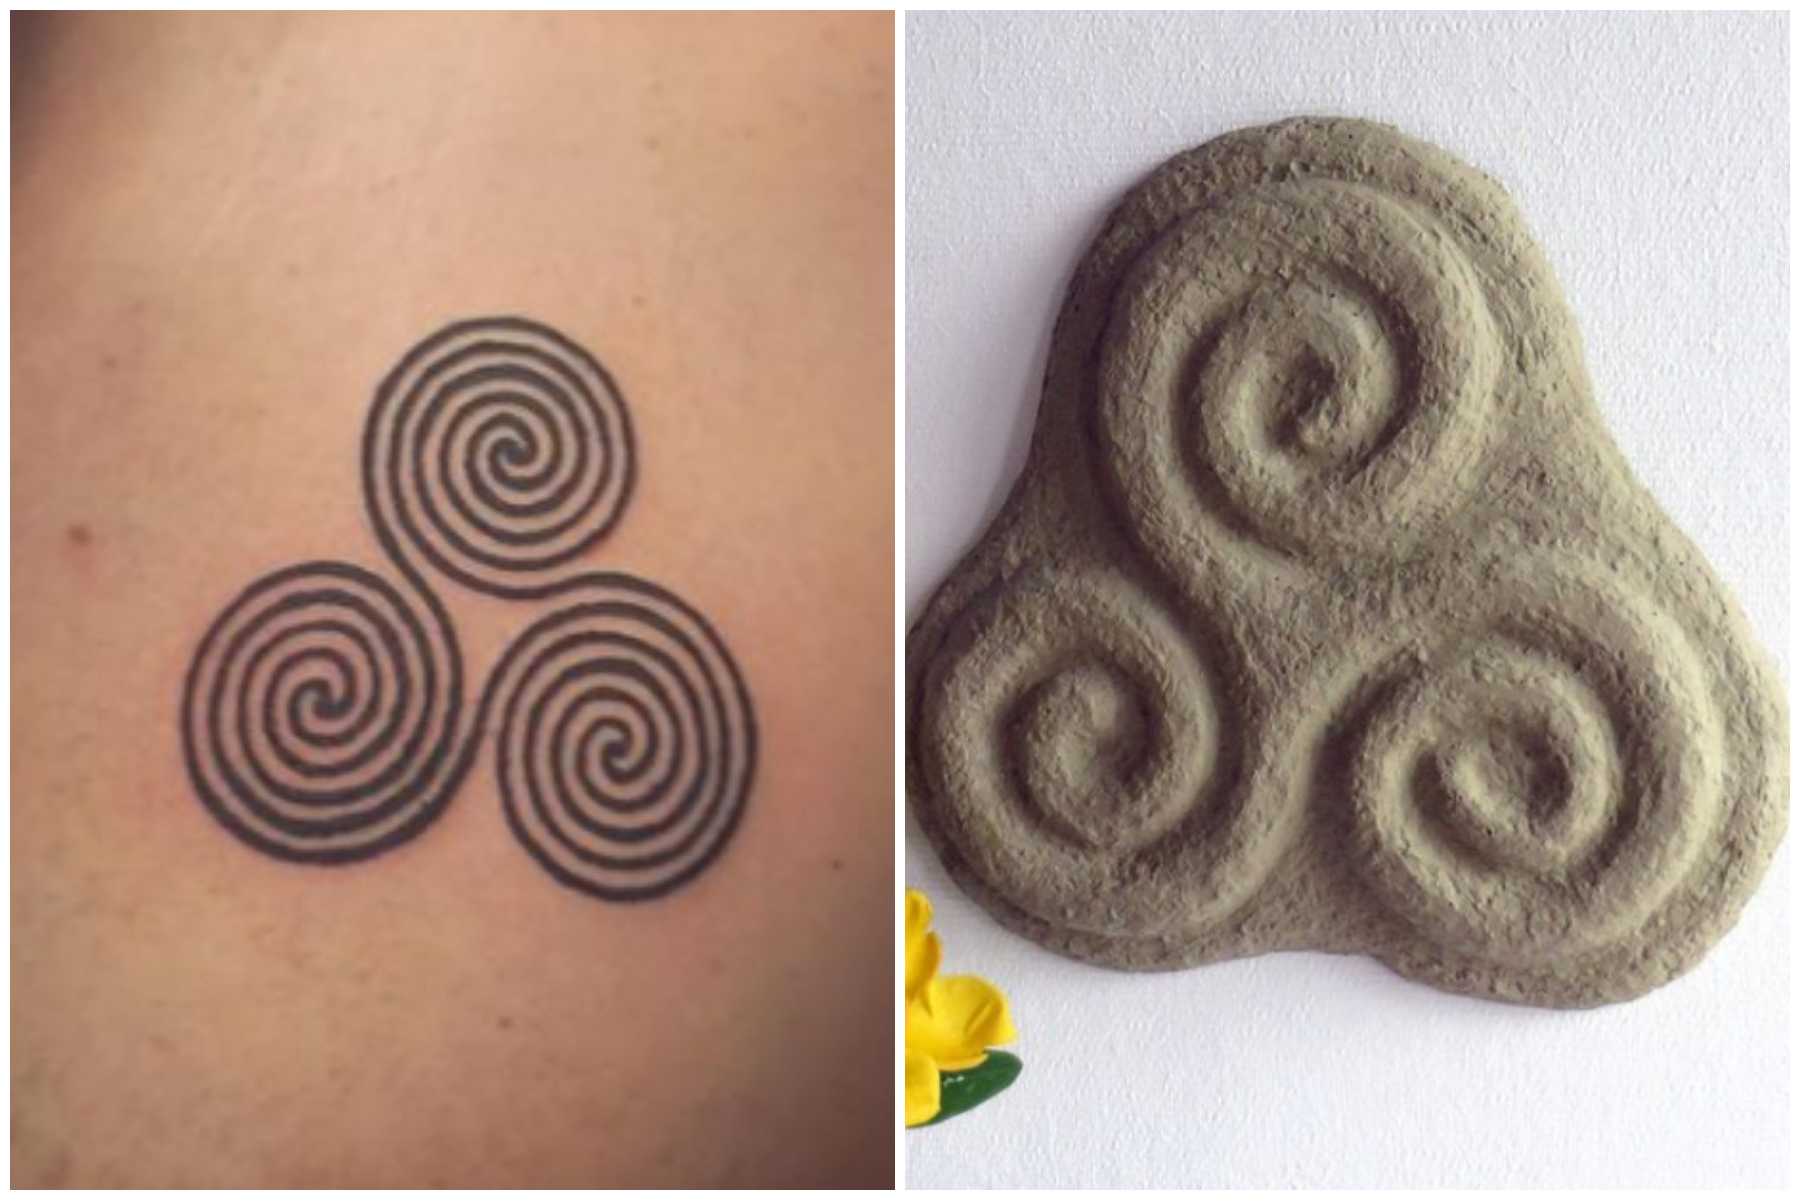 Celtic symbols for the family